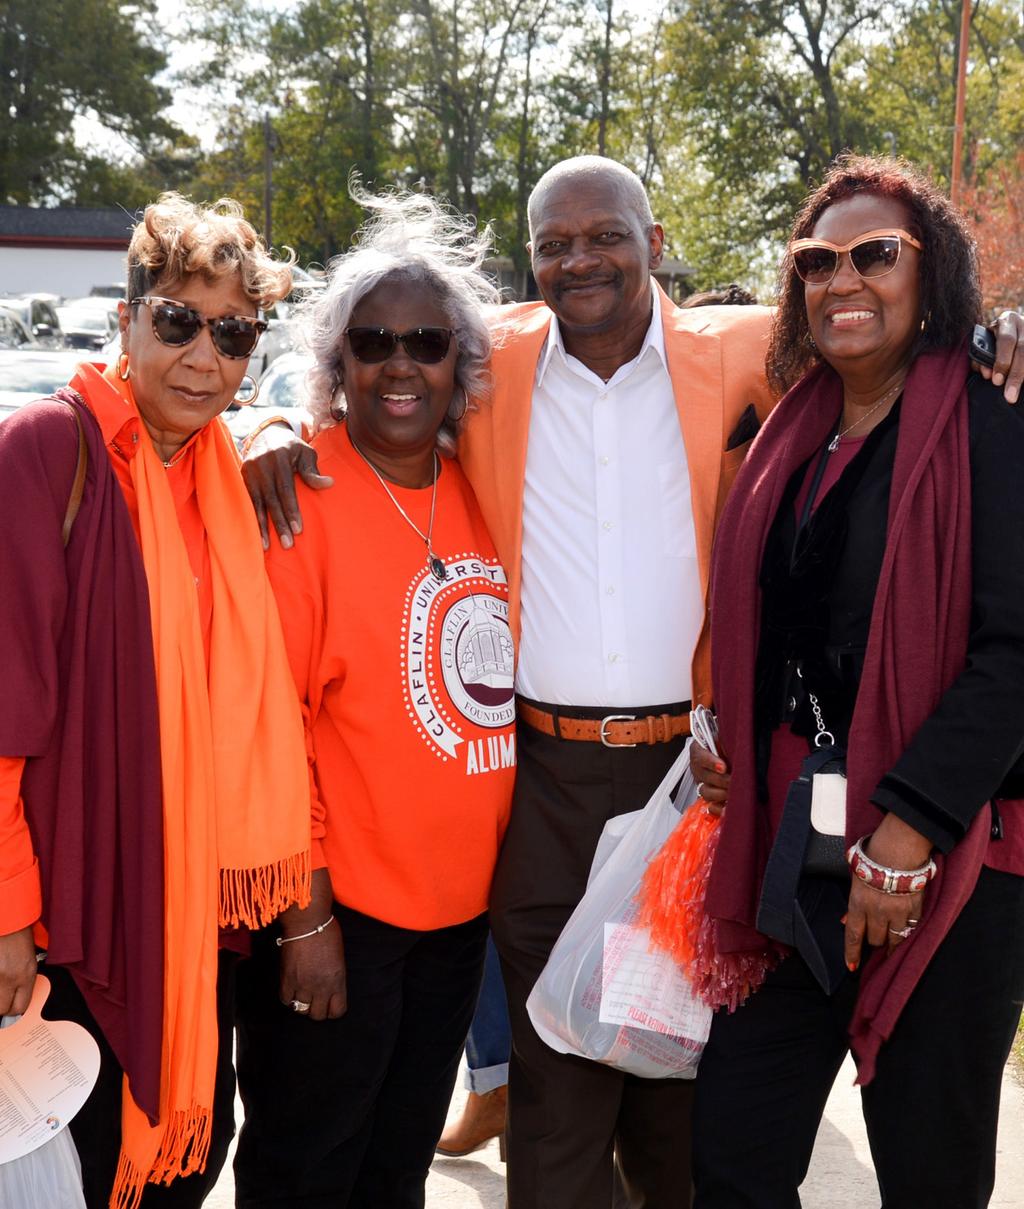 Claflin University Alumni Reunion Weekend November 15-18, 2018 ALL WEEKEND Registration: $70 per person This includes all activities taking place November 15-18, excluding events requiring additional